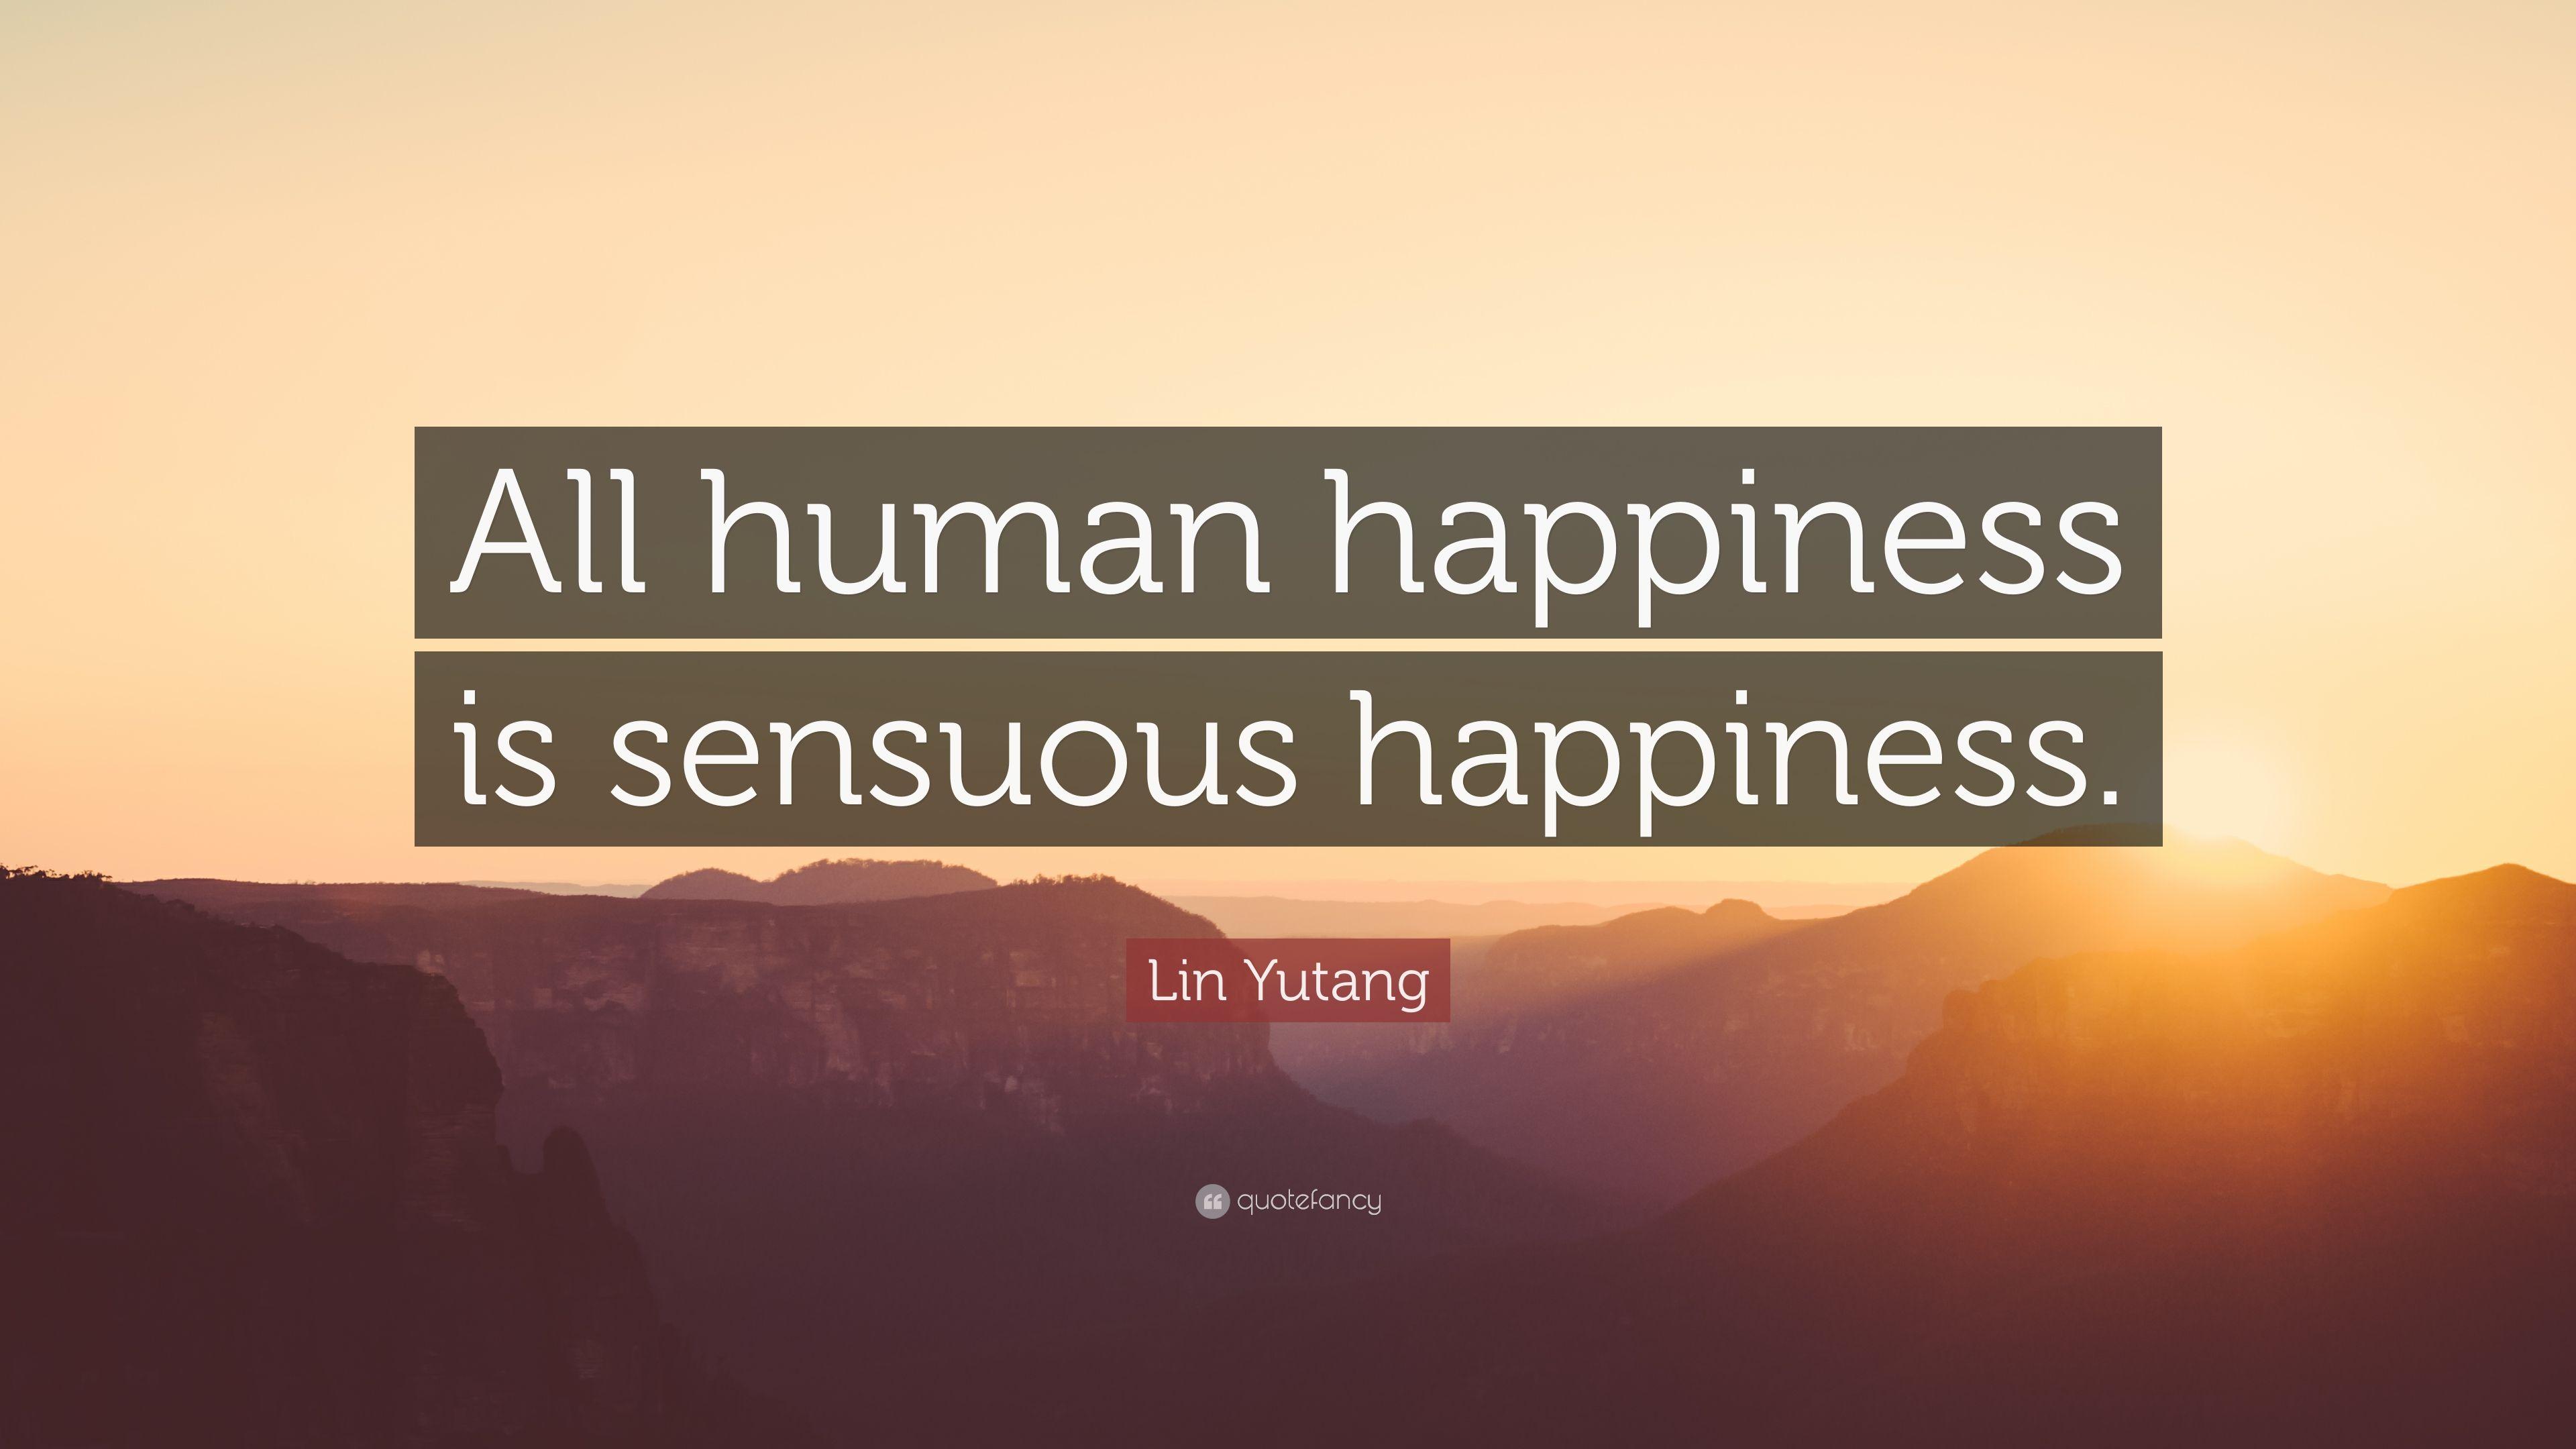 Lin Yutang Quote: “All human happiness is sensuous happiness